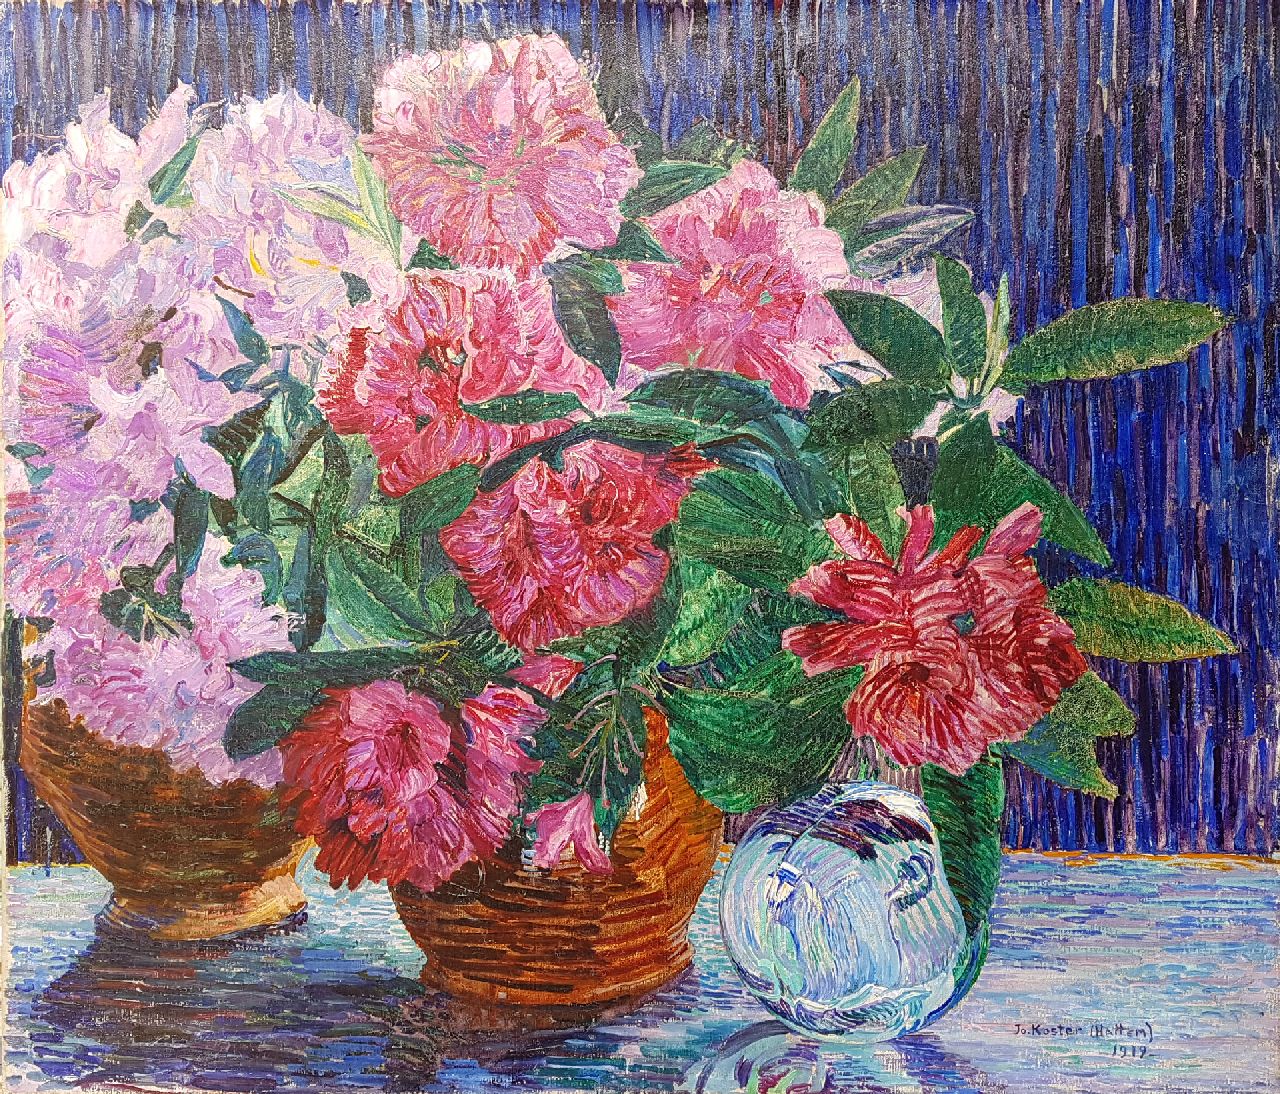 Koster J.P.C.A.  | Johanna Petronella Catharina Antoinetta 'Jo' Koster, Rhododendron branches in a vase, oil on canvas 60.5 x 70.2 cm, signed l.r. and dated 1919